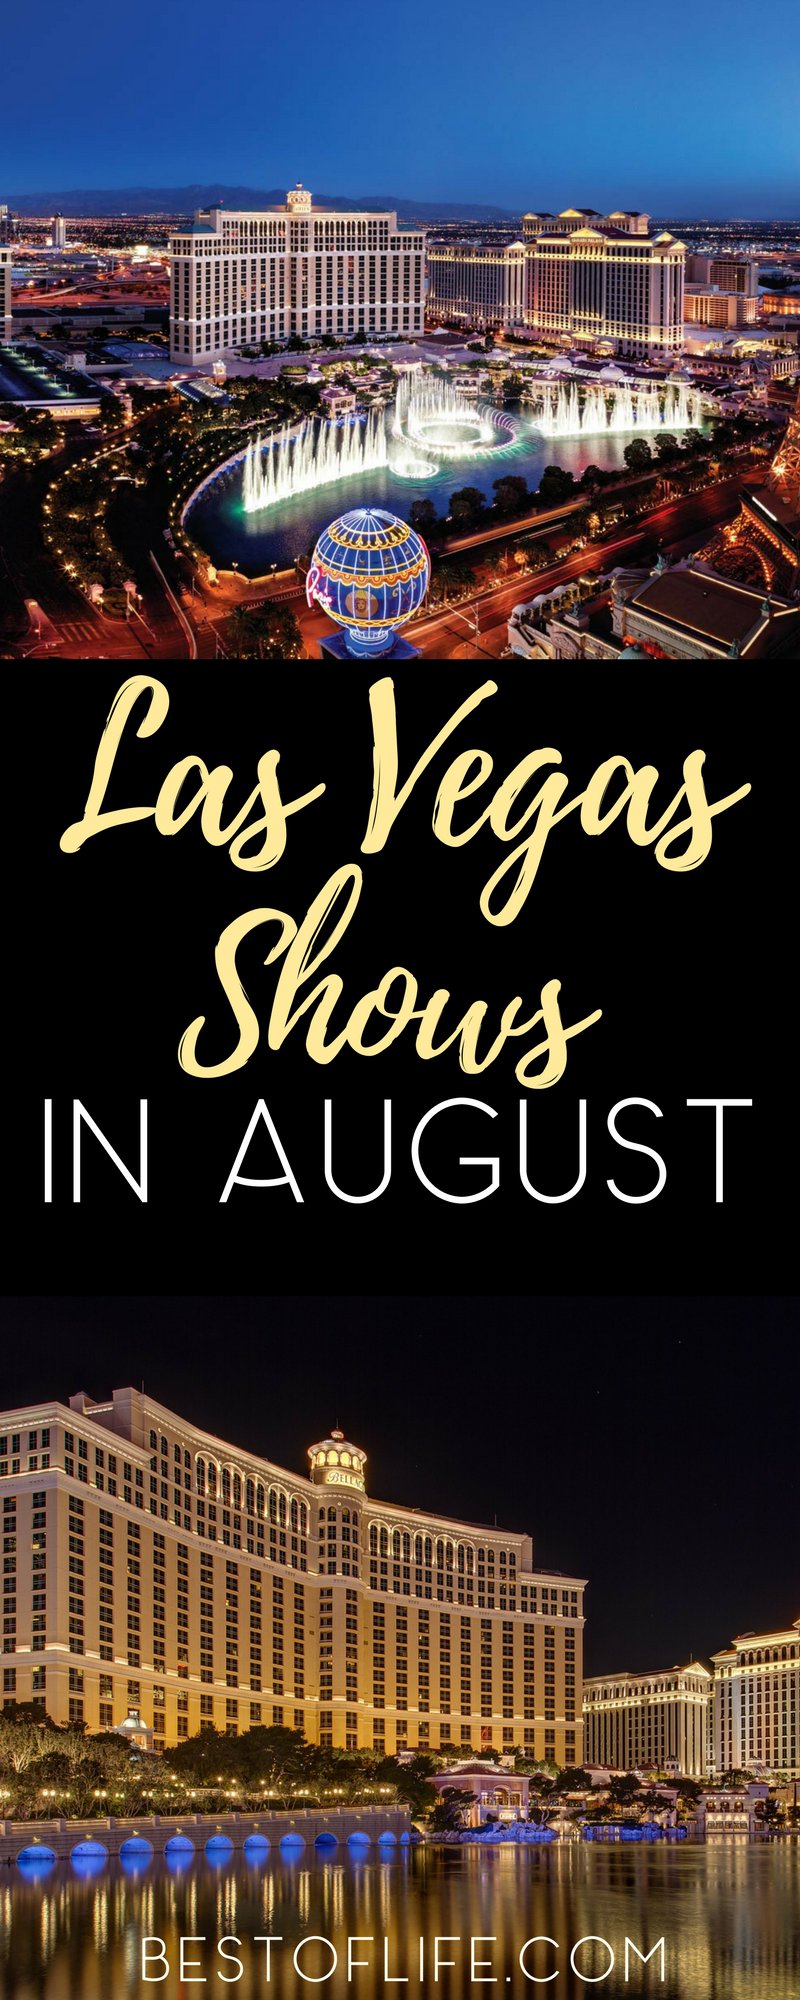 Las Vegas Shows to See in August 2017 The Best of Life